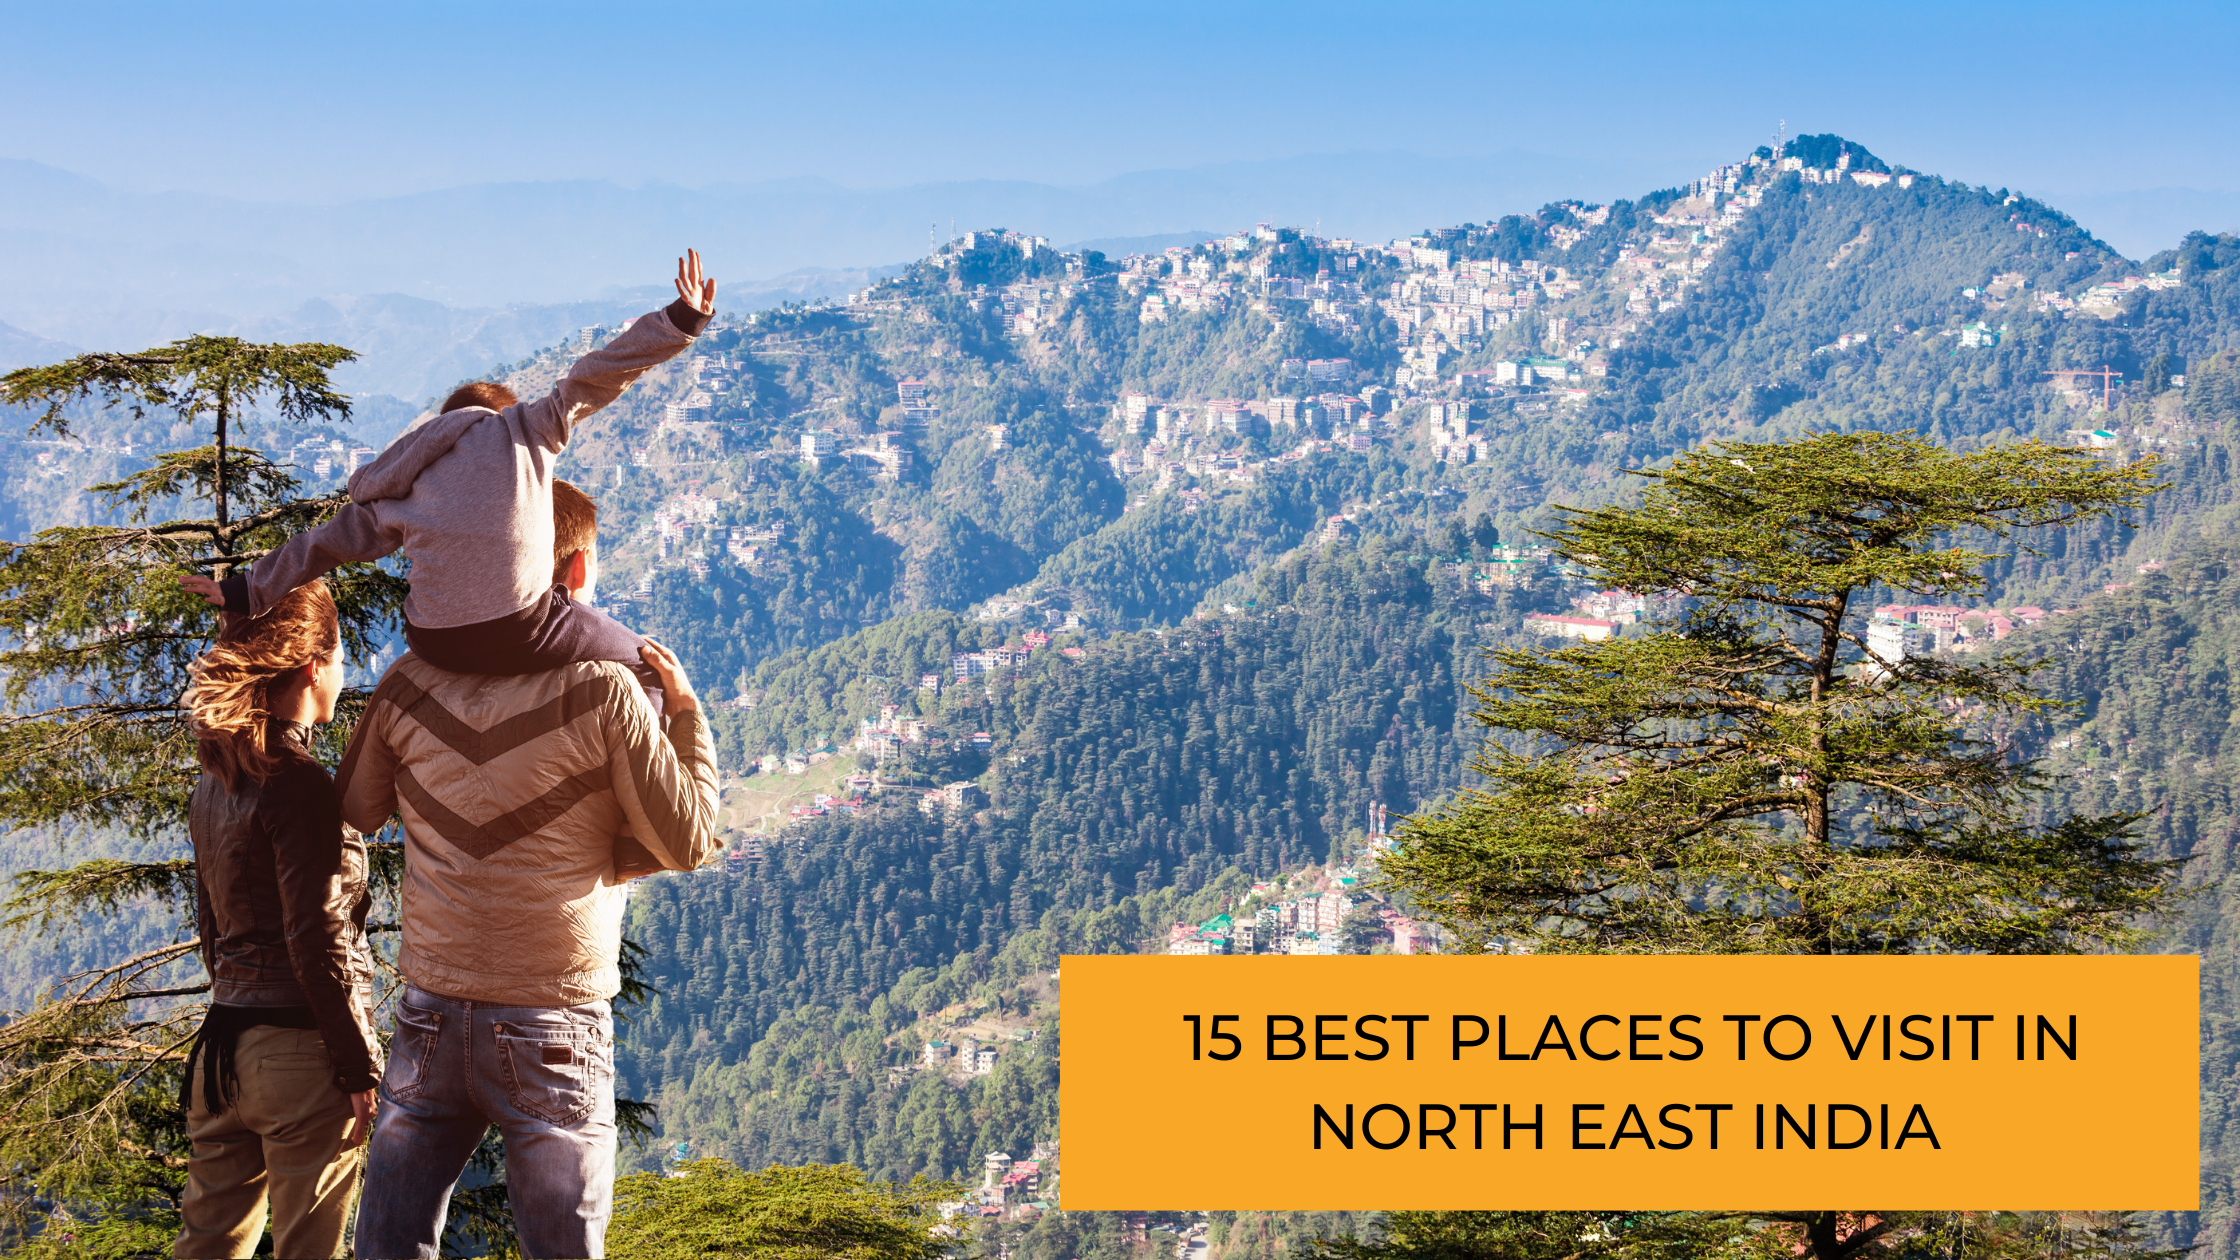 15 Best Places To Visit in North East India